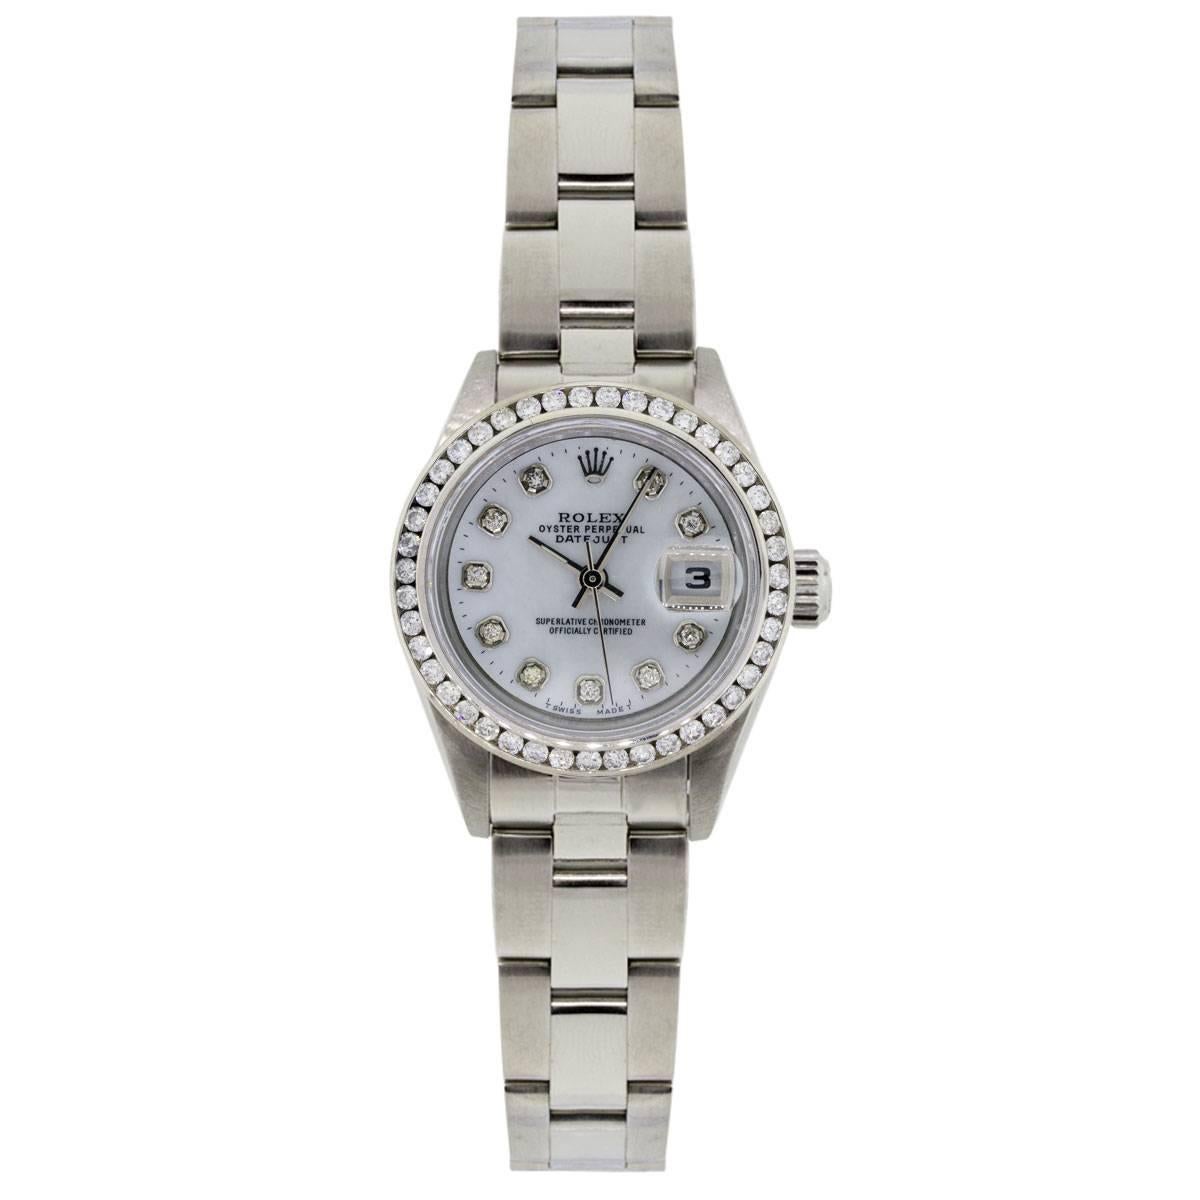 Brand: Rolex
MPN: 79174
Model: Datejust
Case Material: Stainless steel
Case Diameter: 26mm
Crystal: Sapphire crystal
Bezel: Custom Diamond bezel
Dial: Custom Mother of Pearl diamond dial with date window at 3 o’clock position
Bracelet: Stainless